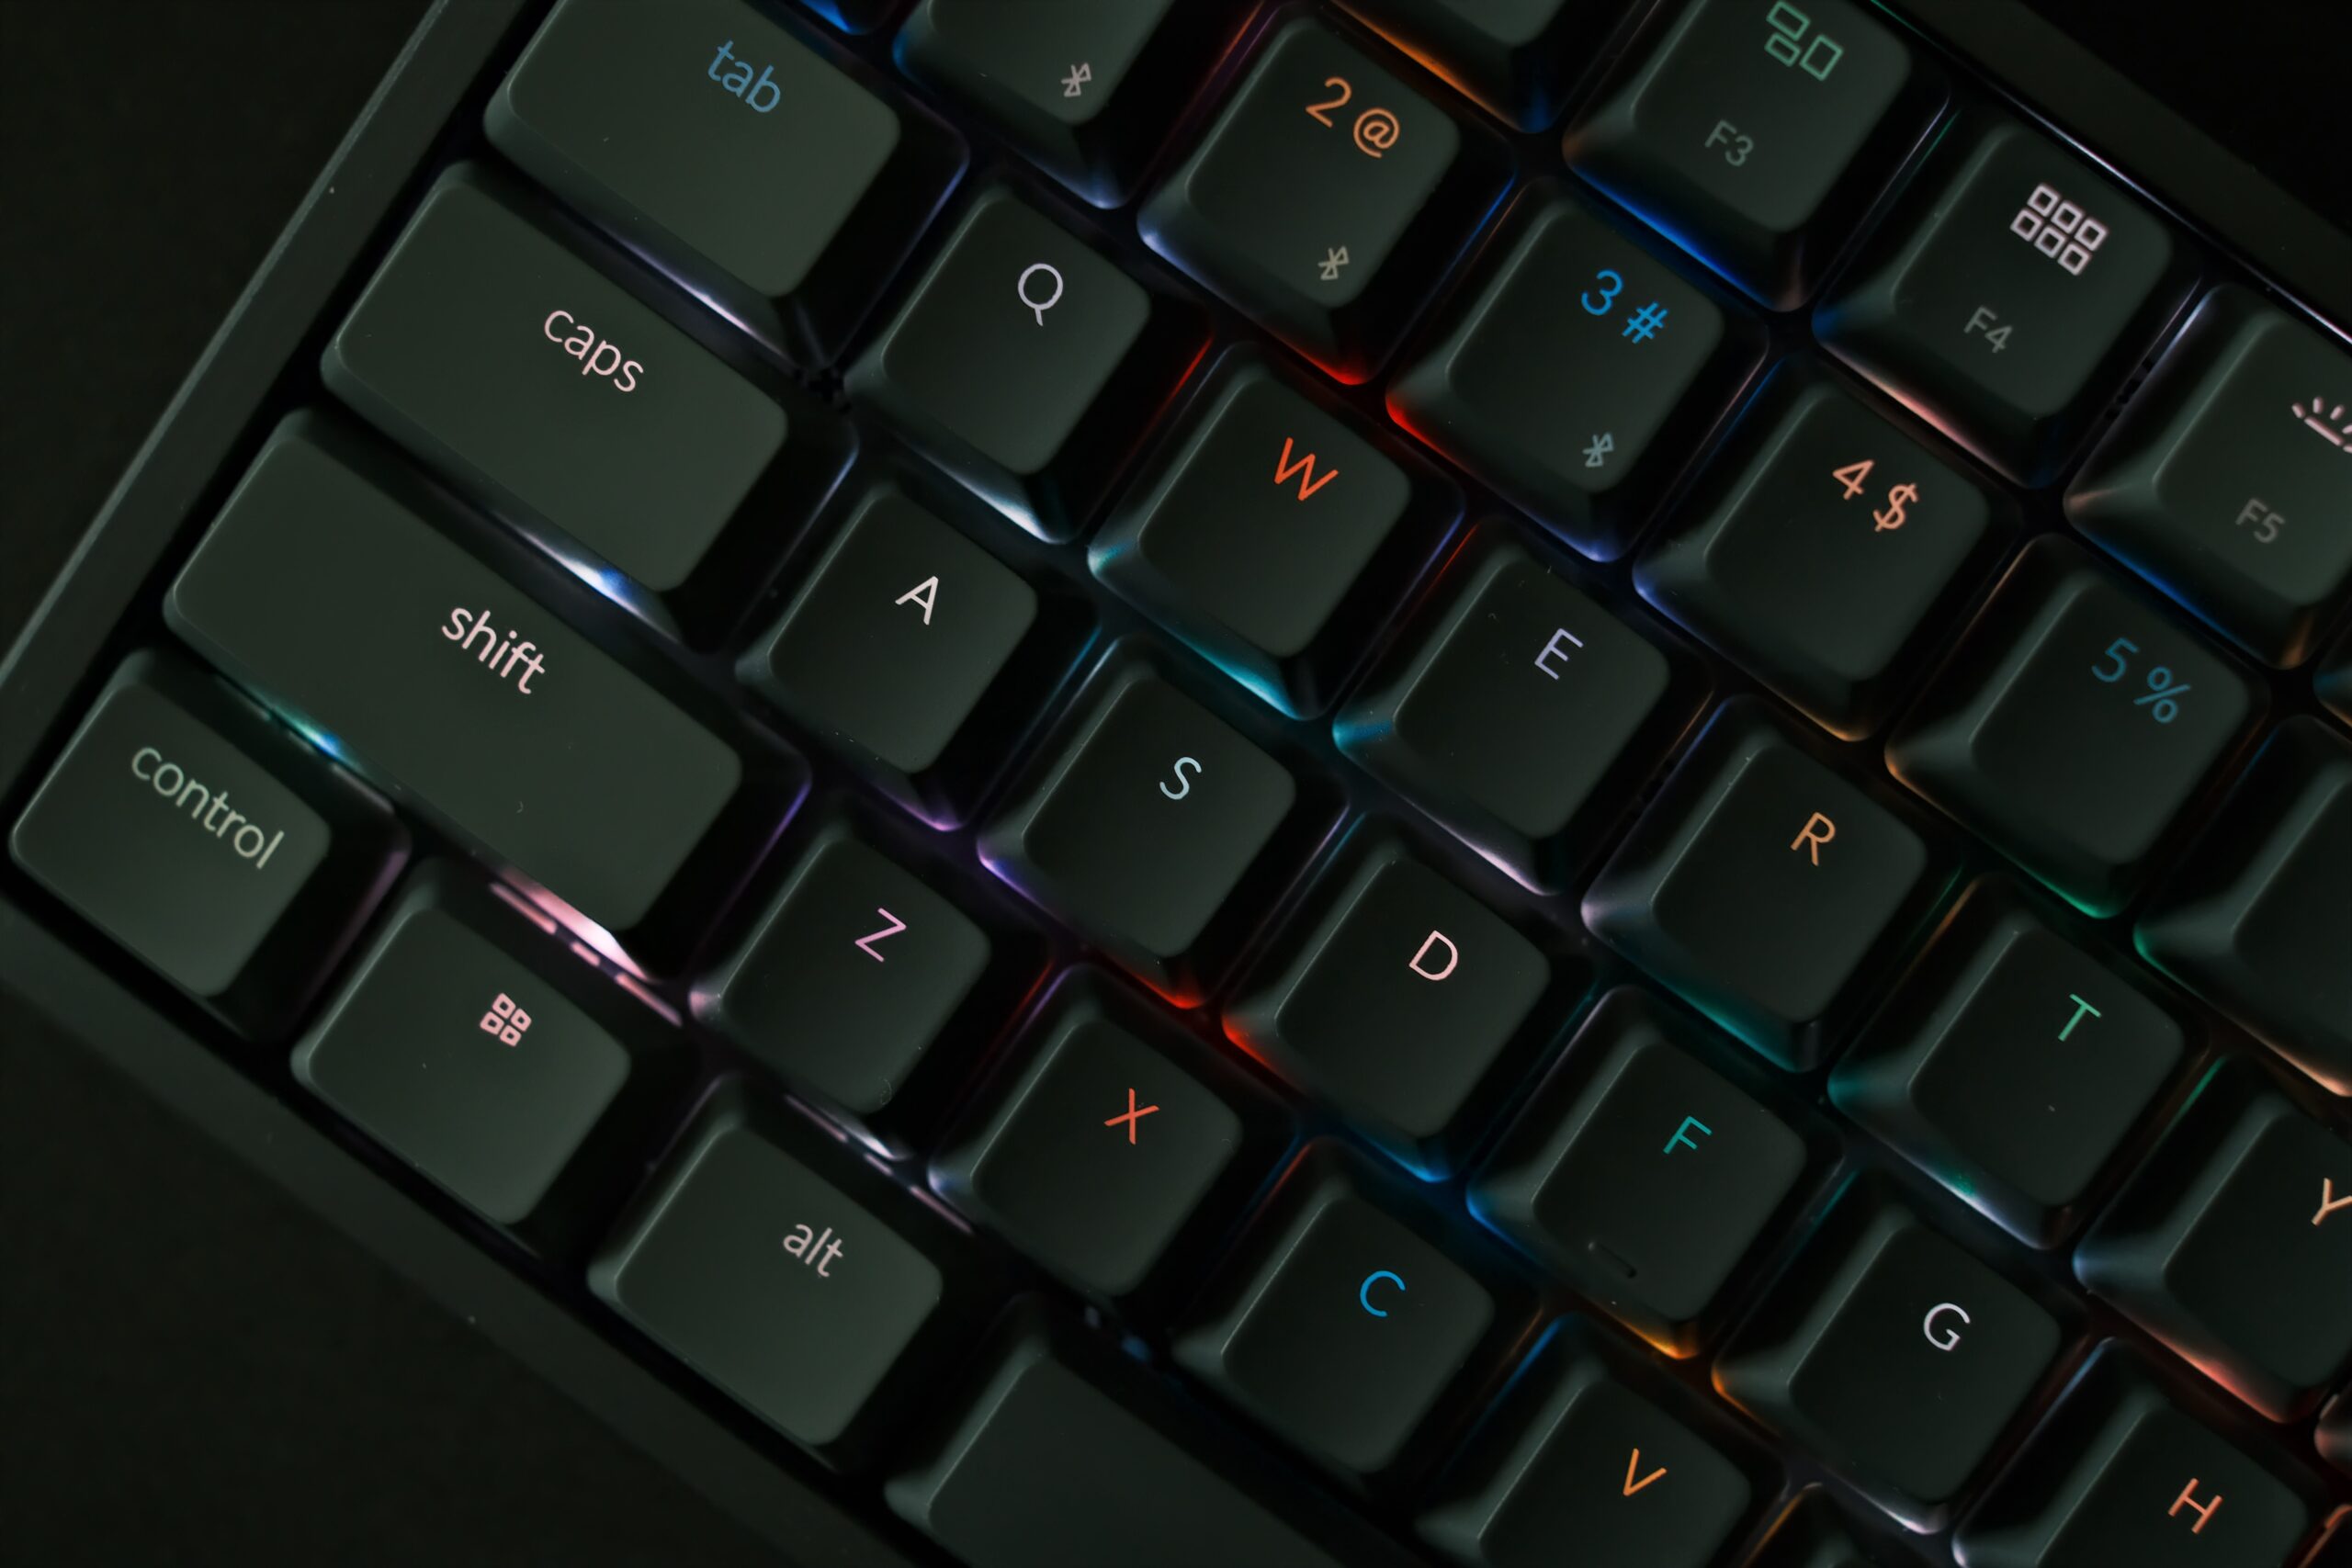 Best Keyboards For Typing